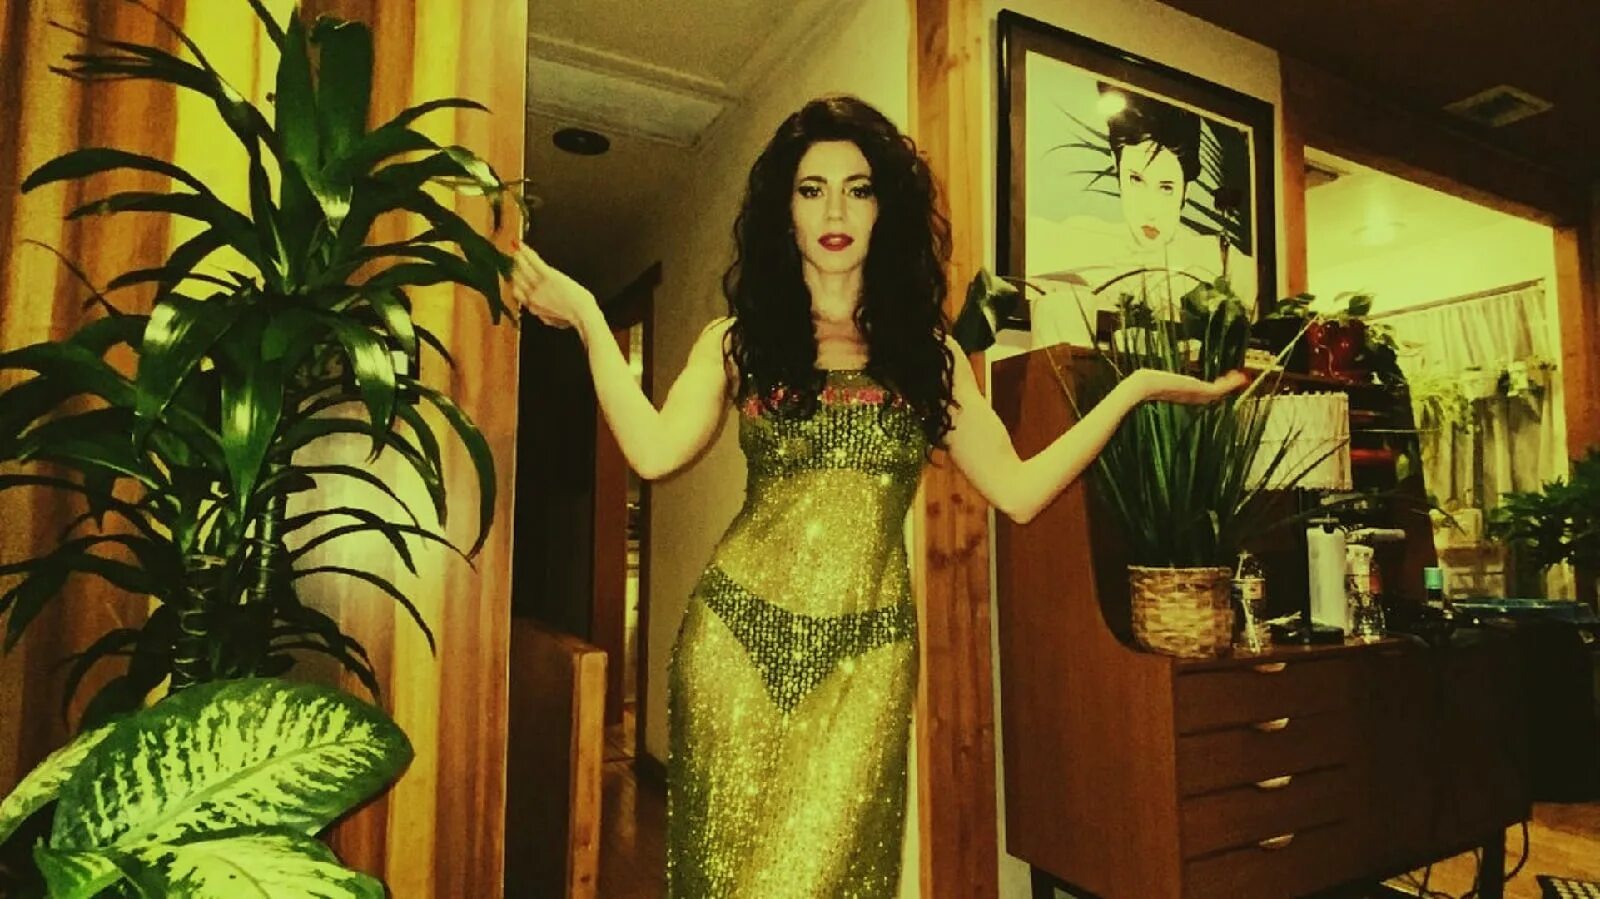 Ancient dreams in modern land speed up. Marina Ancient Dreams in a Modern Land. Marina and the Diamonds Ancient Dreams. Marina - 2021 - Ancient Dreams in a Modern Land. Marina and the Diamonds Ancient Dreams in a Modern Land.